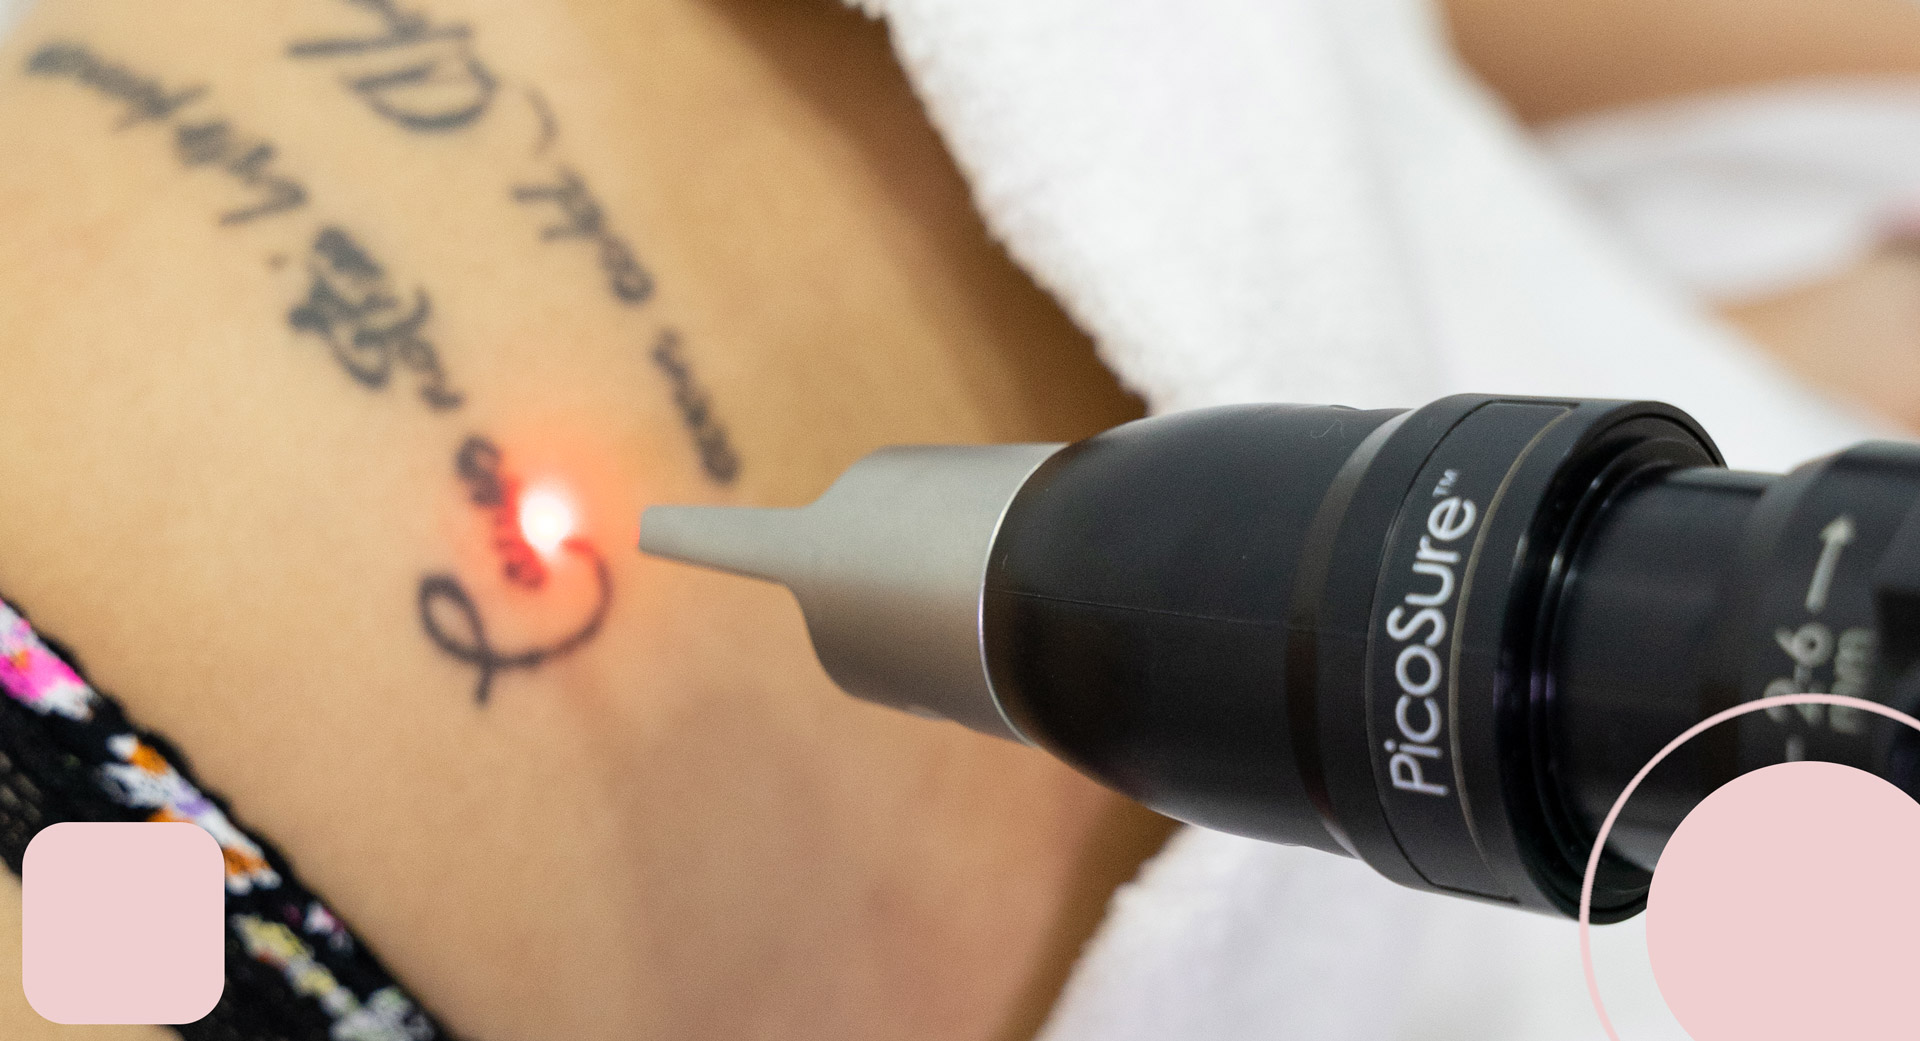 laser tattoo removal, tattoo laser removal